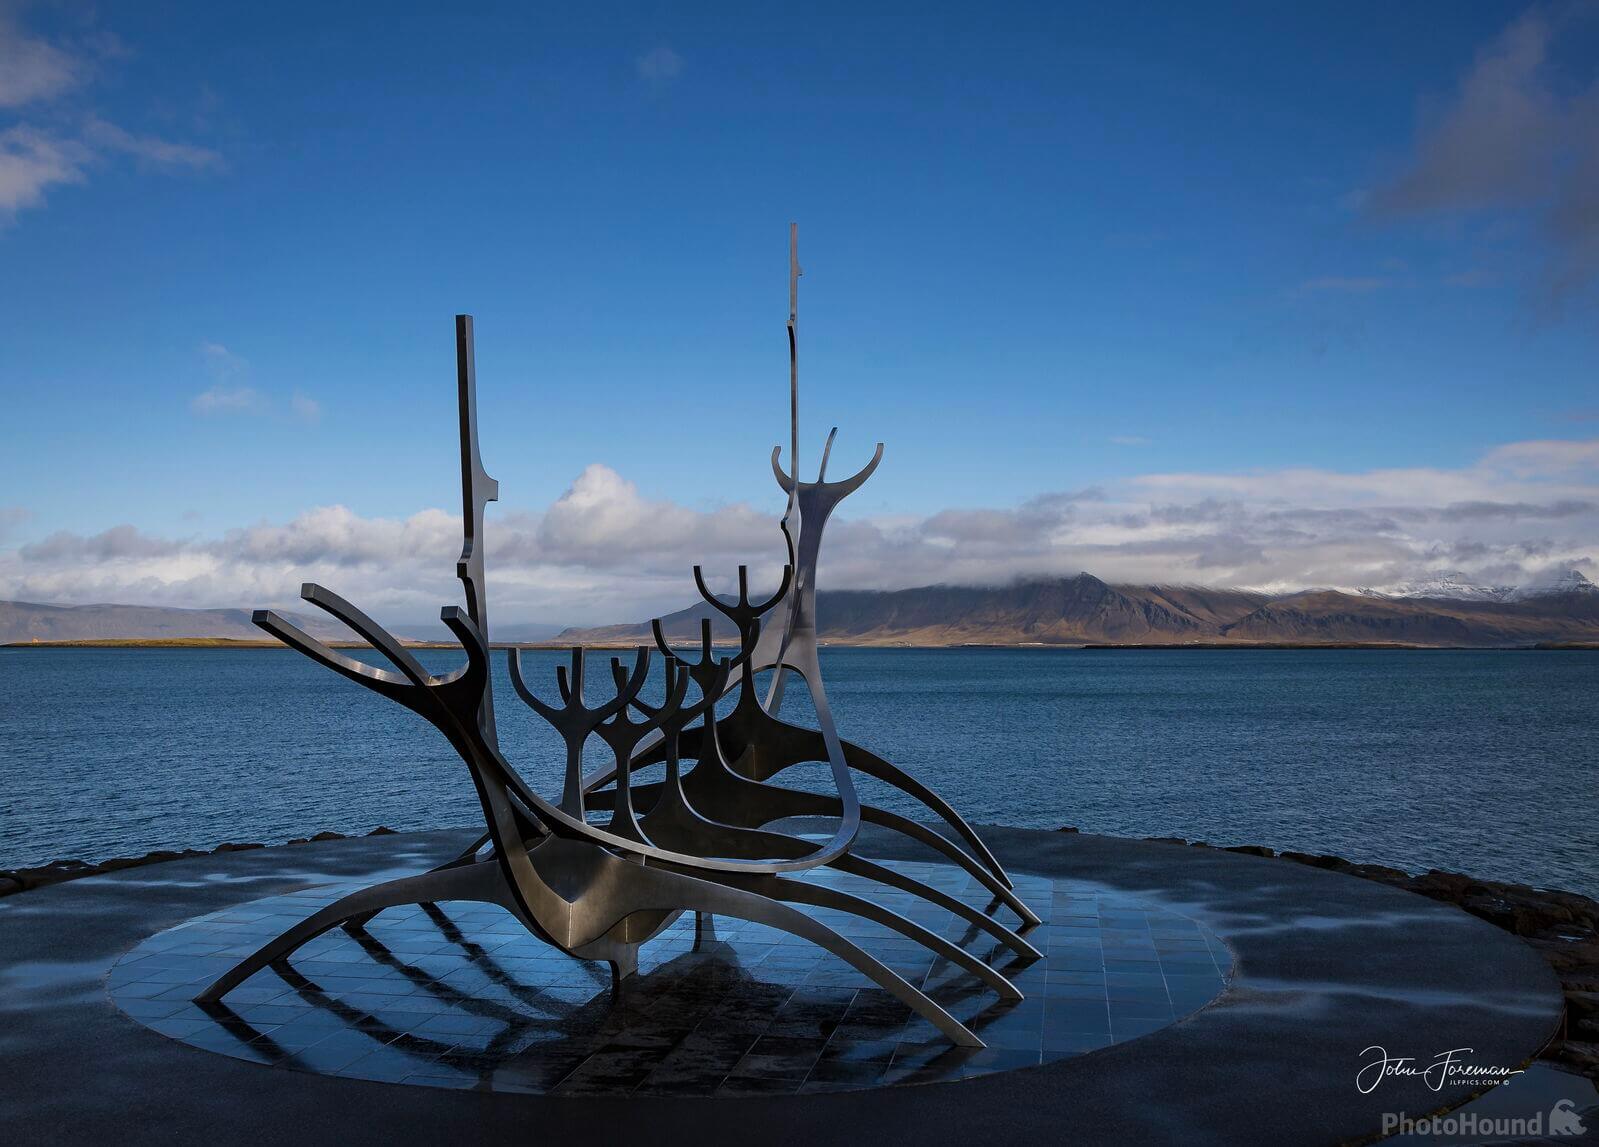 Image of Sun voyager by John Foreman